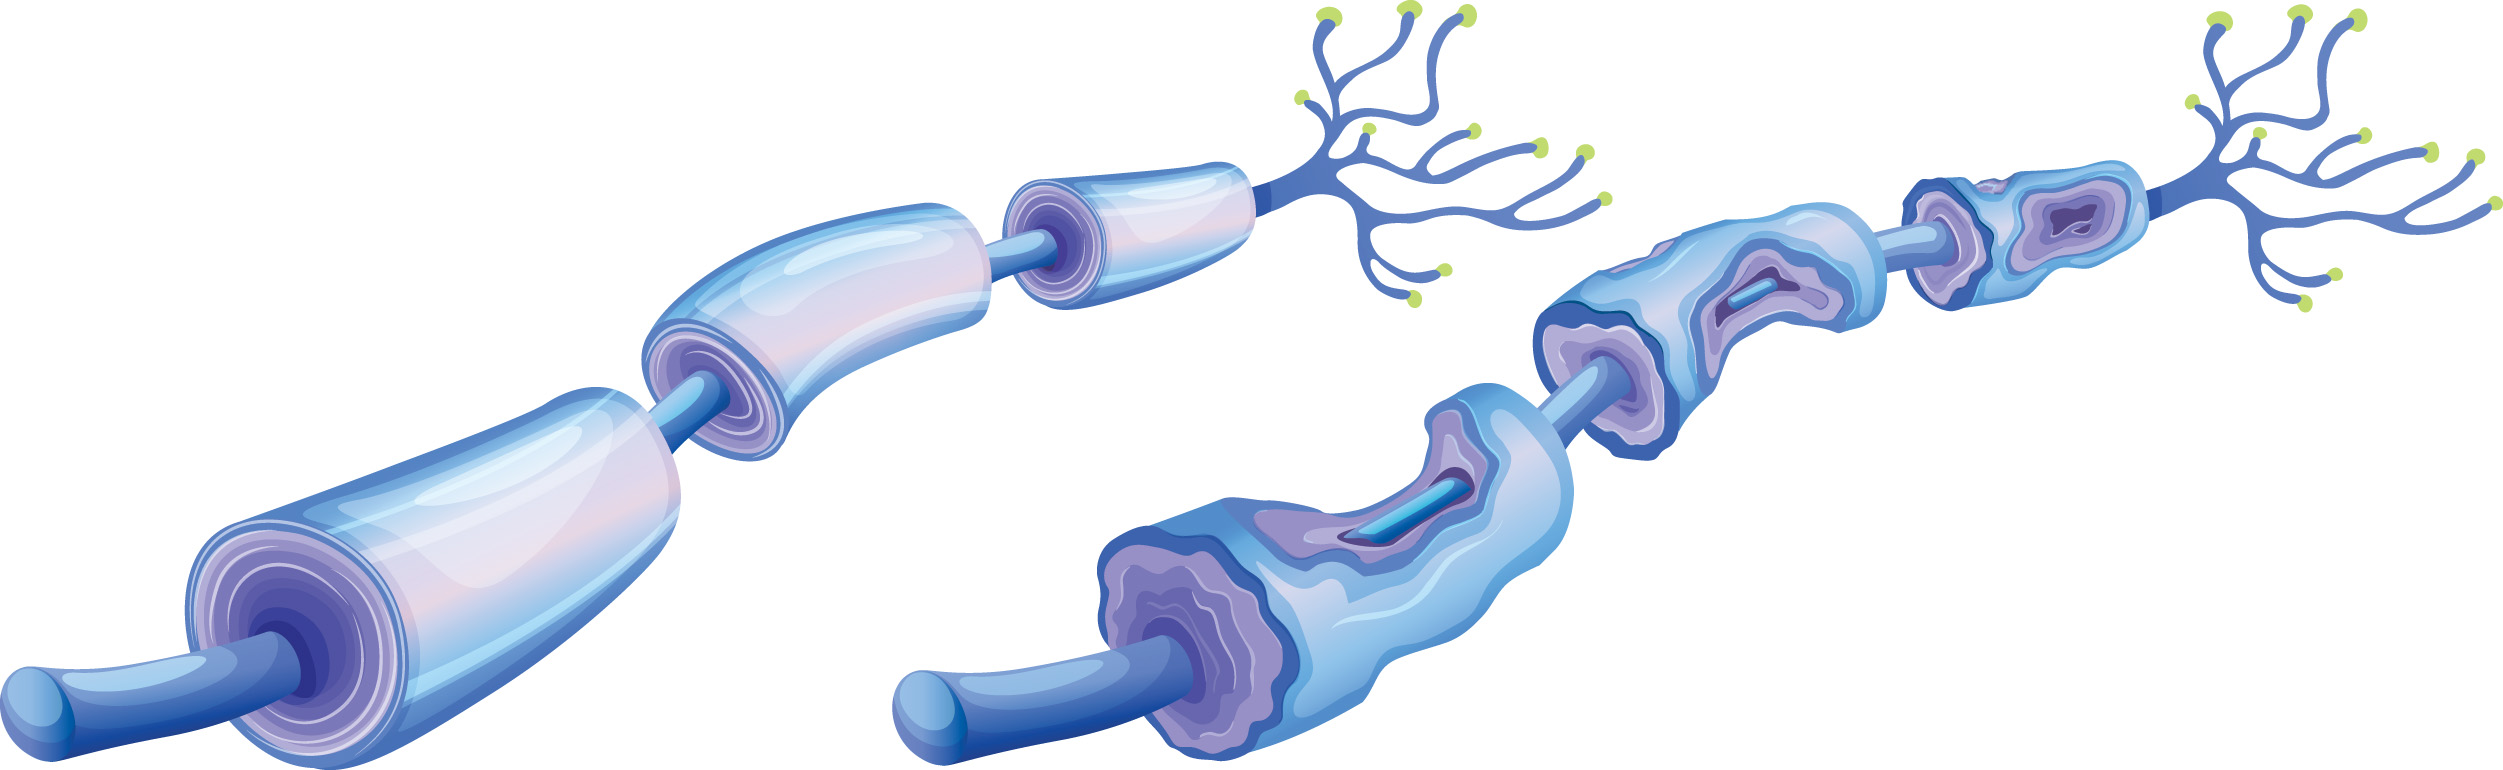 An illustration showing a damaged peripheral nerve cell next to a healthy one.